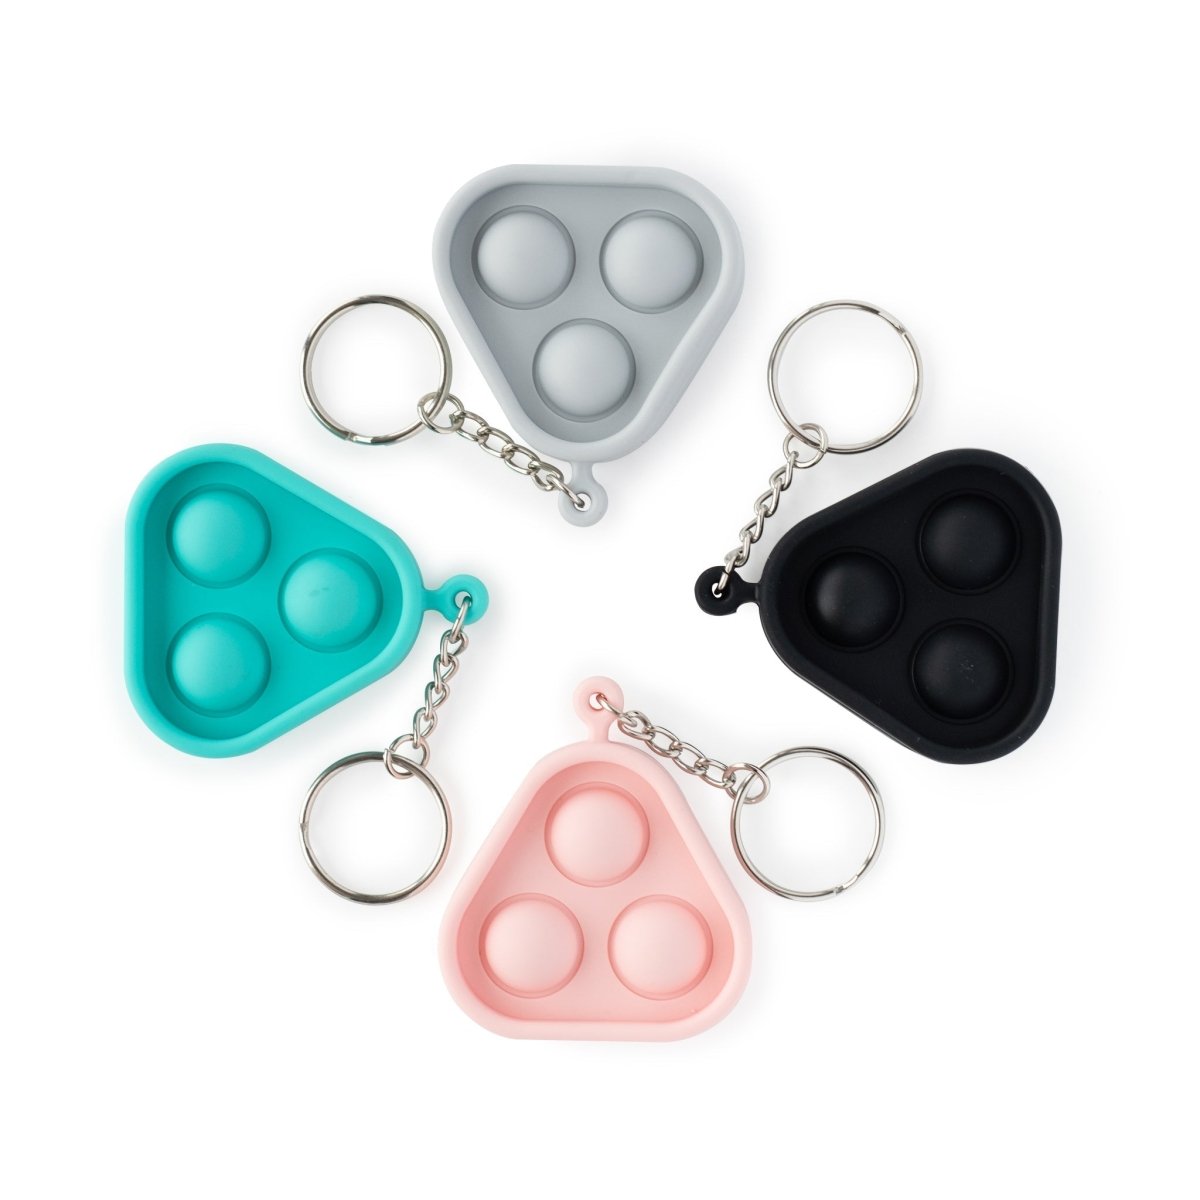 Accessories Bubble-Popper Keychain Black from Cara & Co Craft Supply